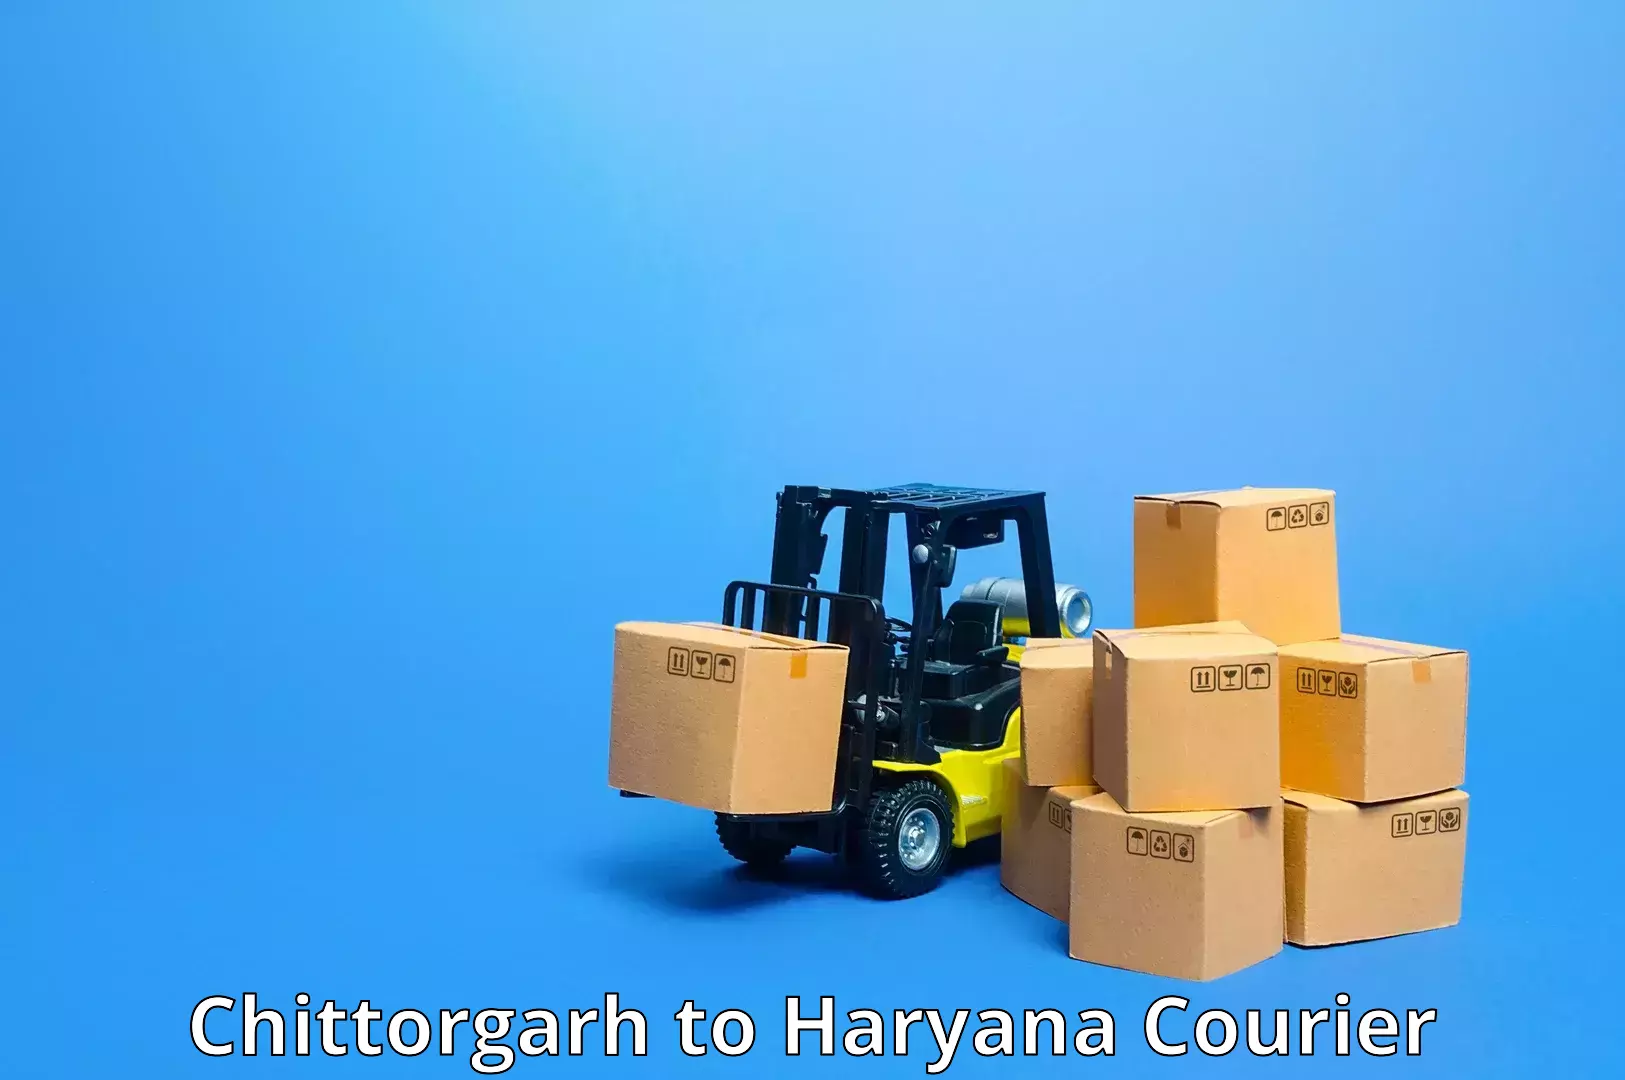 Reliable freight solutions Chittorgarh to Dharuhera